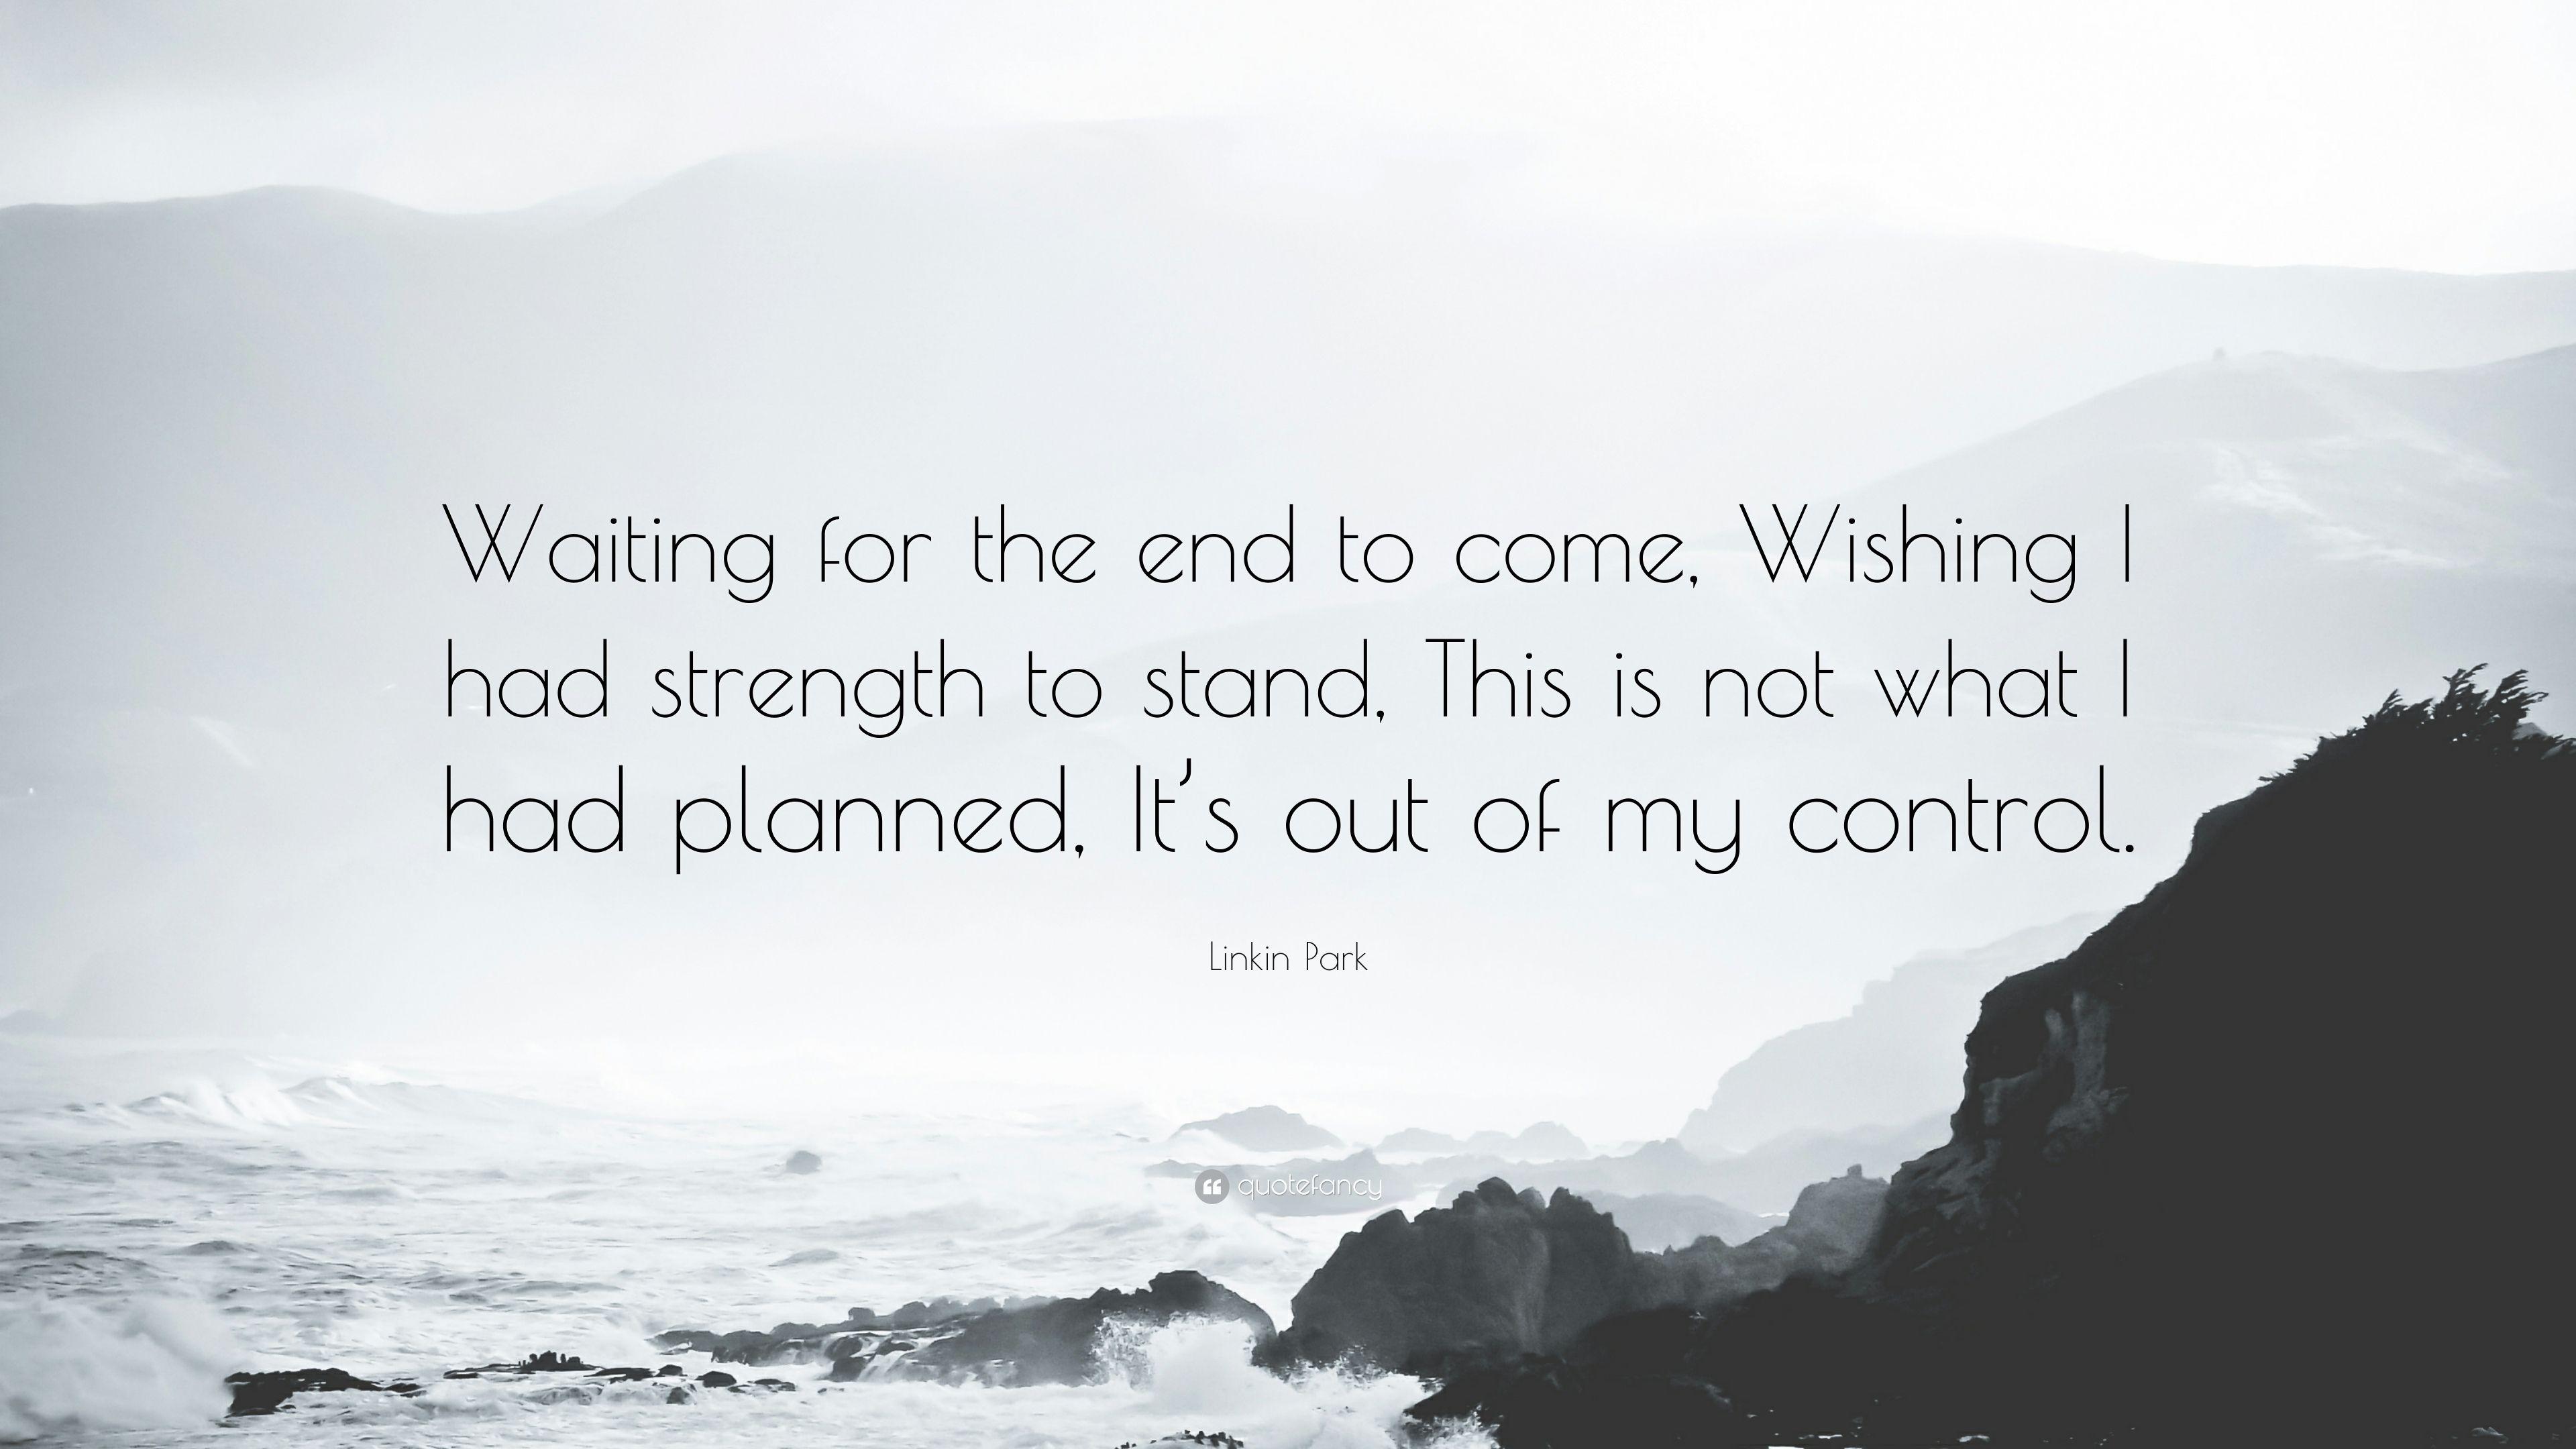 Linkin Park Quote: “Waiting for the end to come, Wishing I had